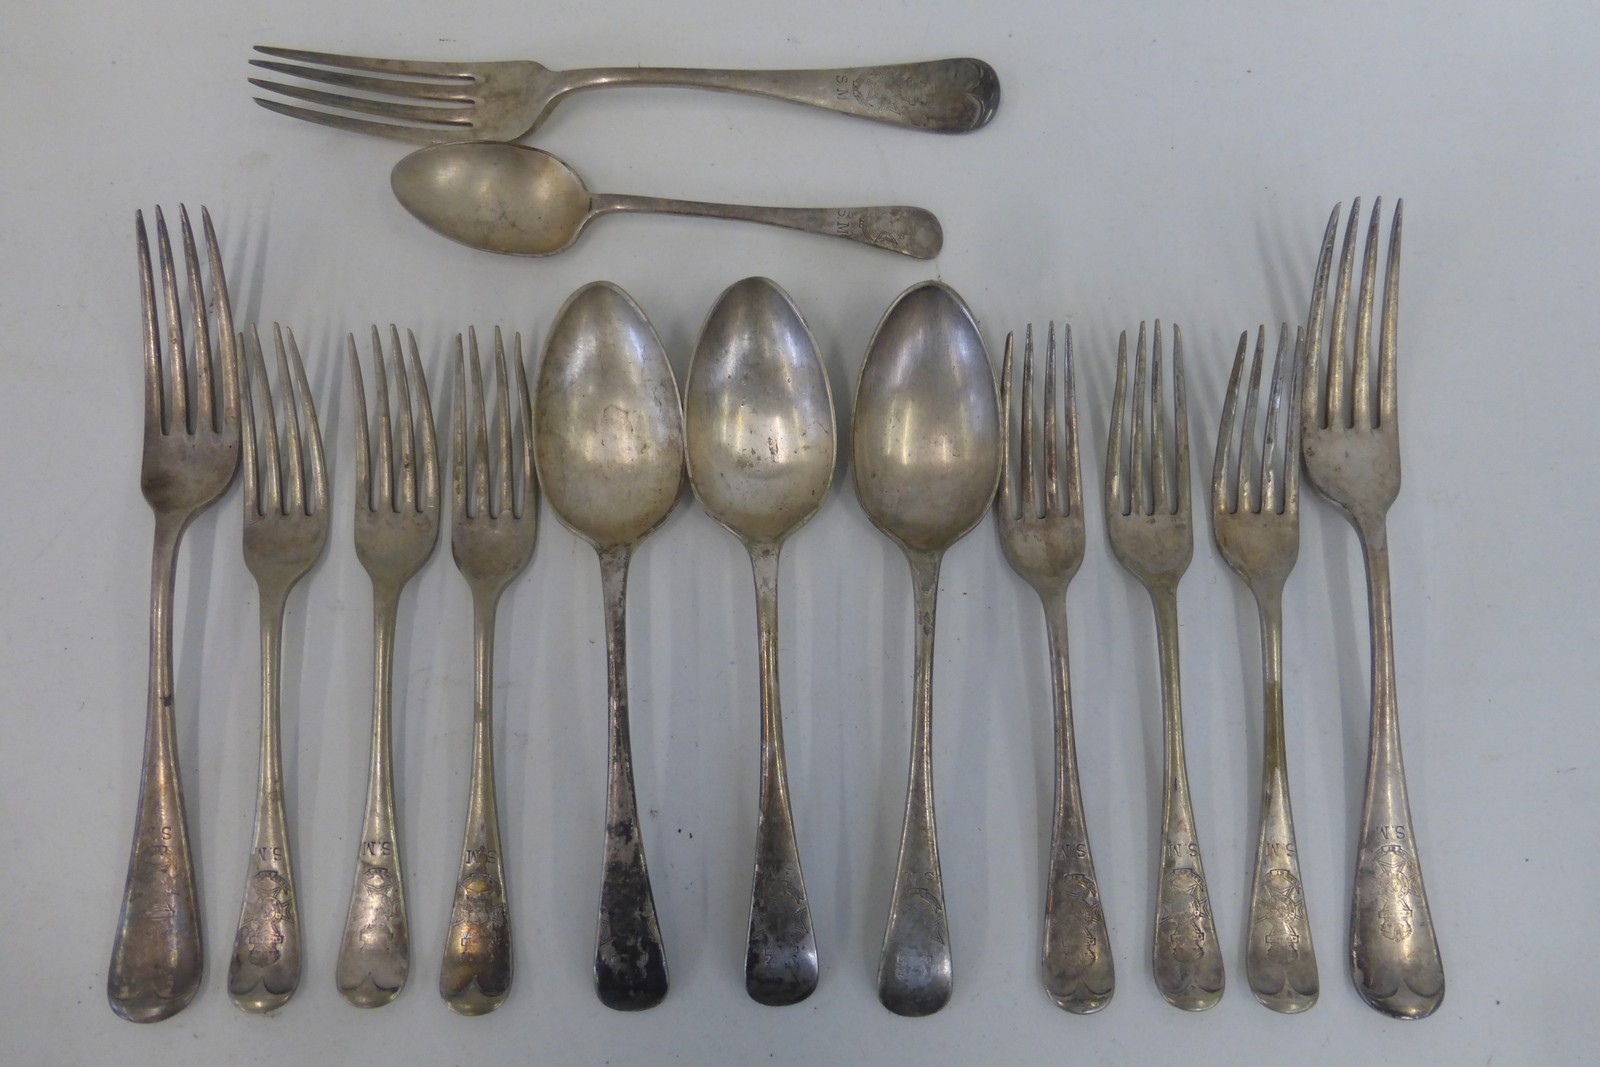 Kings Royal Rifle Corps cutlery from the Sergeants mess.